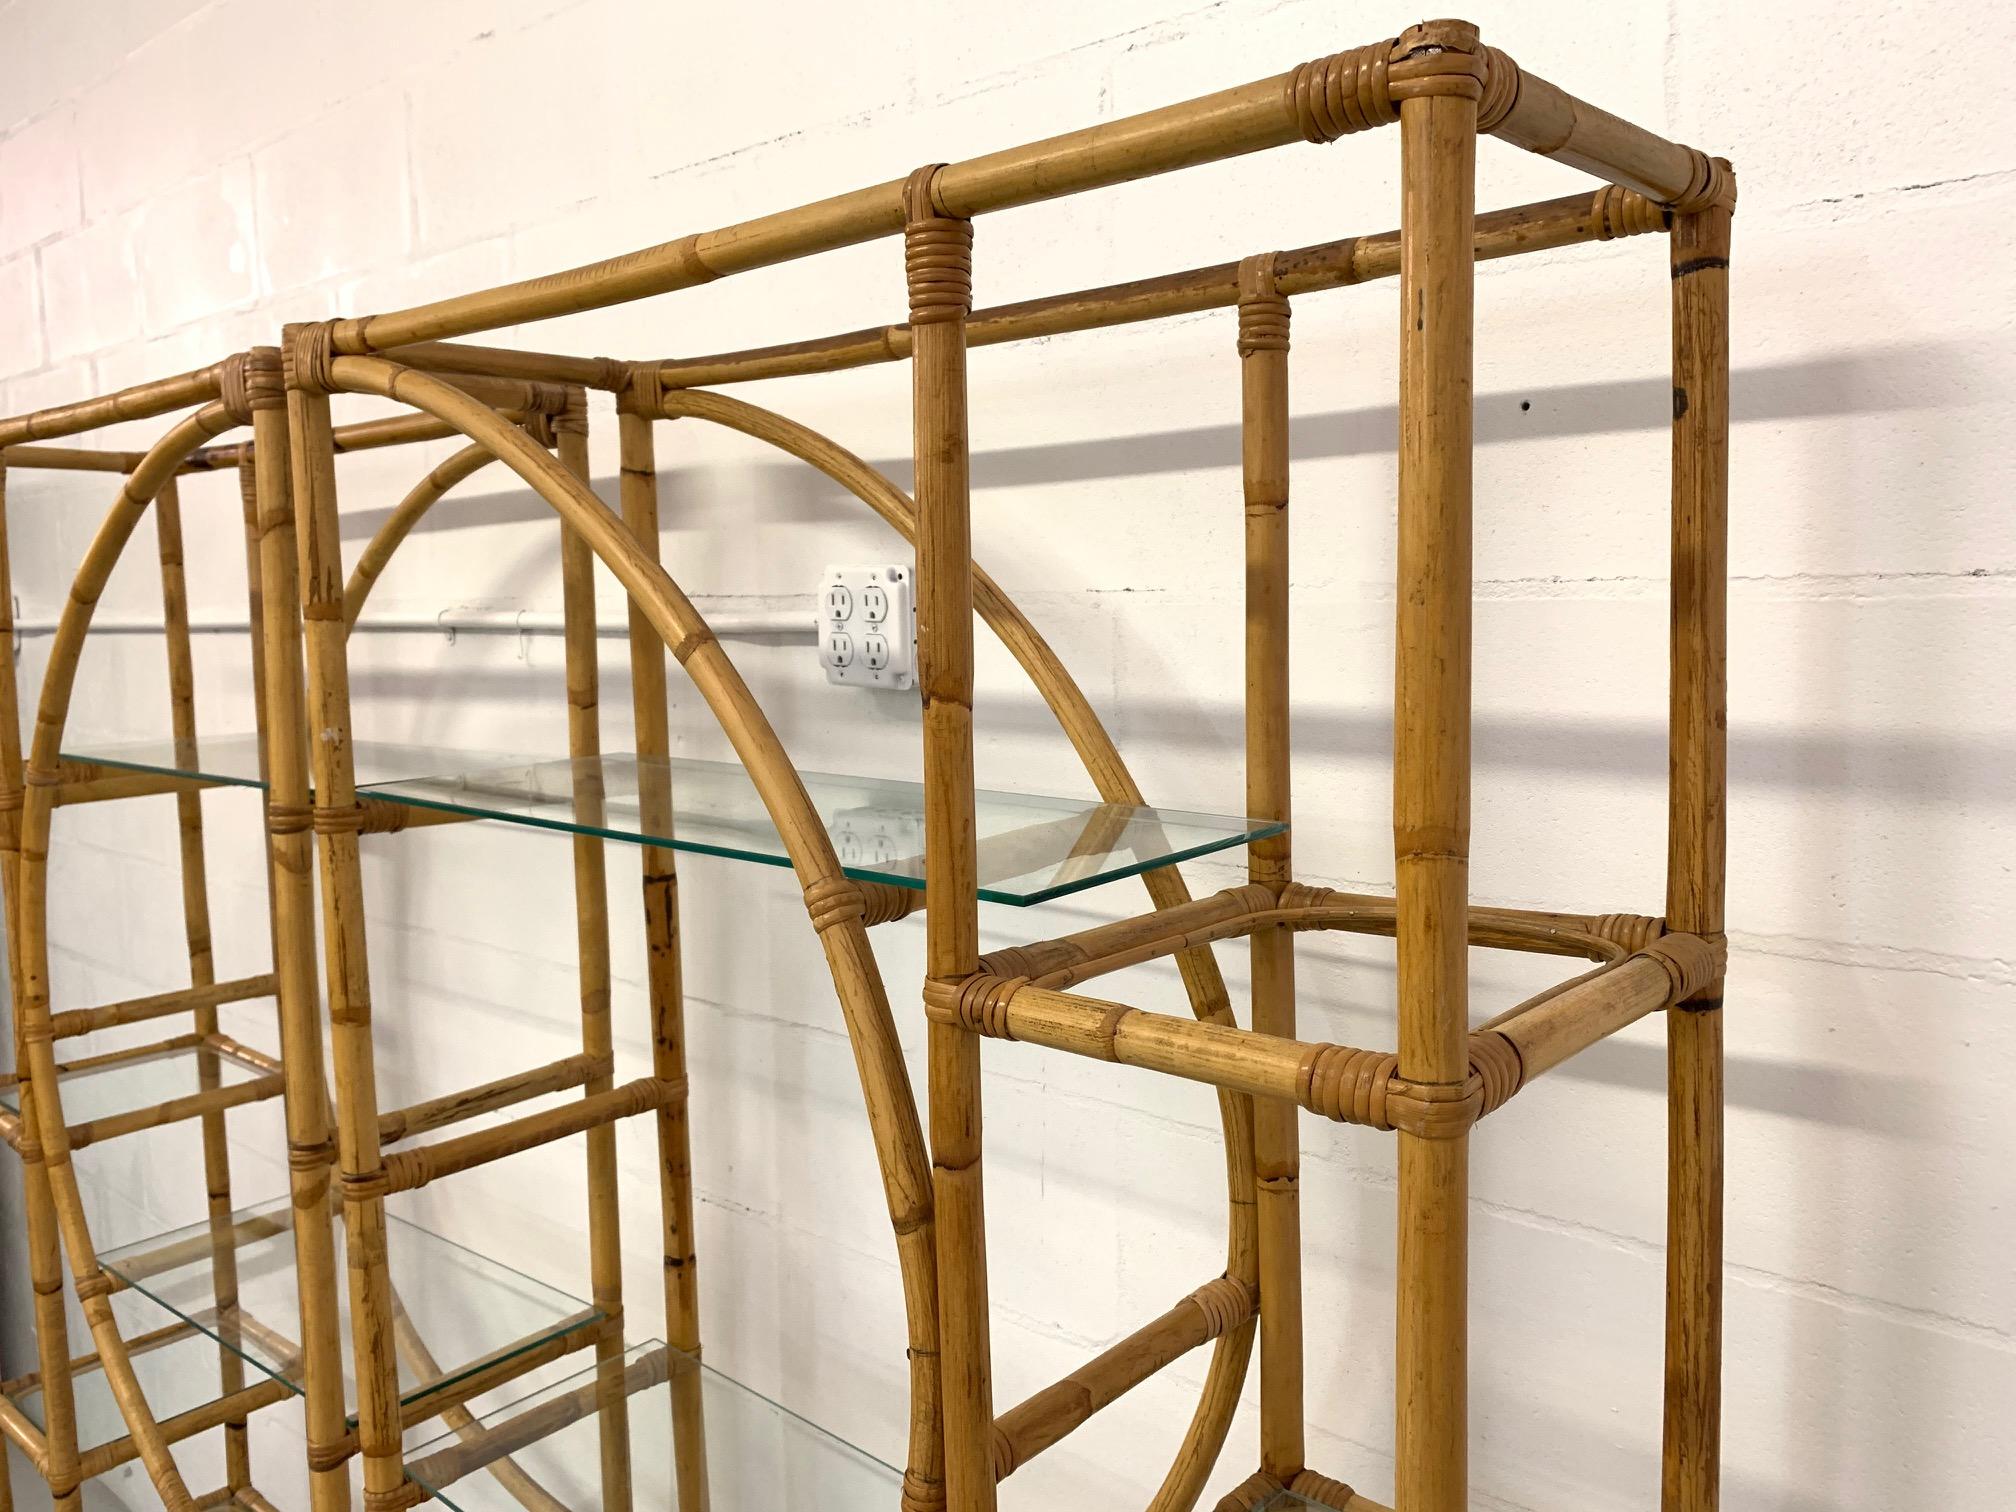 Pair of rattan étagères feature round center design and glass shelving, circa 1960s. Very good condition with very minor imperfections consistent with age. Each piece measures 36